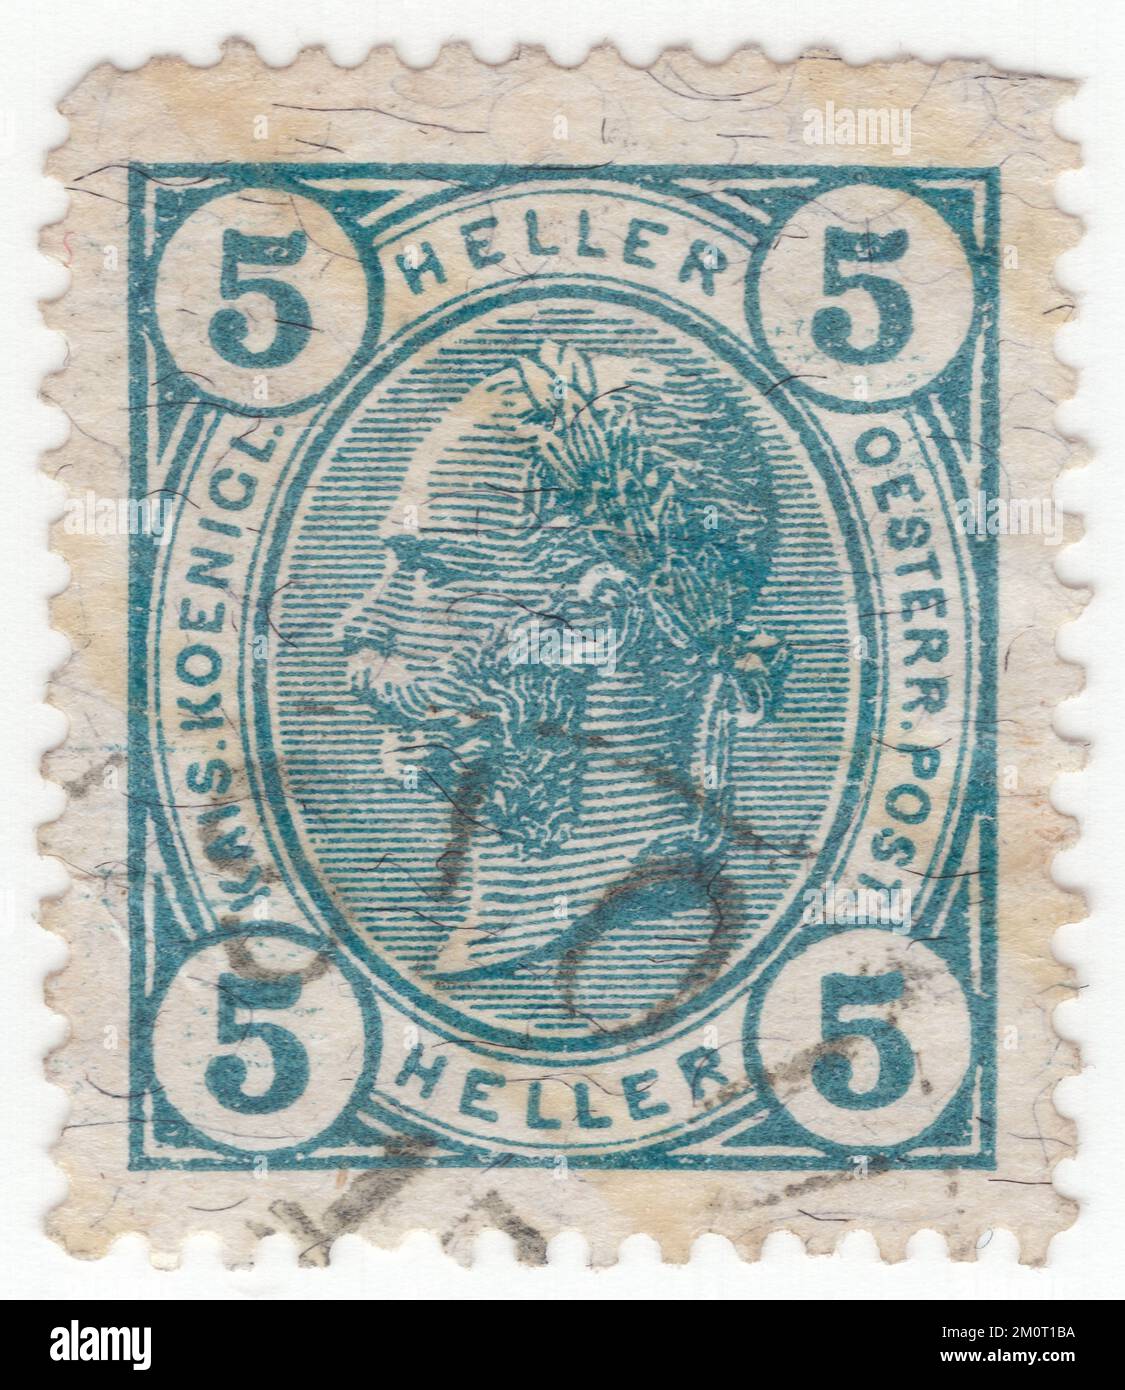 AUSTRIA — 1904: An 5 heller dark-blue green postage stamp depicting Embossed portrait of young Austrian Monarch Emperor Franz Josef. Franz Joseph I or Francis Joseph I was Emperor of Austria, King of Hungary, and the other states of the Habsburg monarchy from 2 December 1848 until his death on 21 November 1916. In the early part of his reign, his realms and territories were referred to as the Austrian Empire, but were reconstituted as the dual monarchy of the Austro-Hungarian Empire in 1867. From 1 May 1850 to 24 August 1866, Franz Joseph was also President of the German Confederation Stock Photo